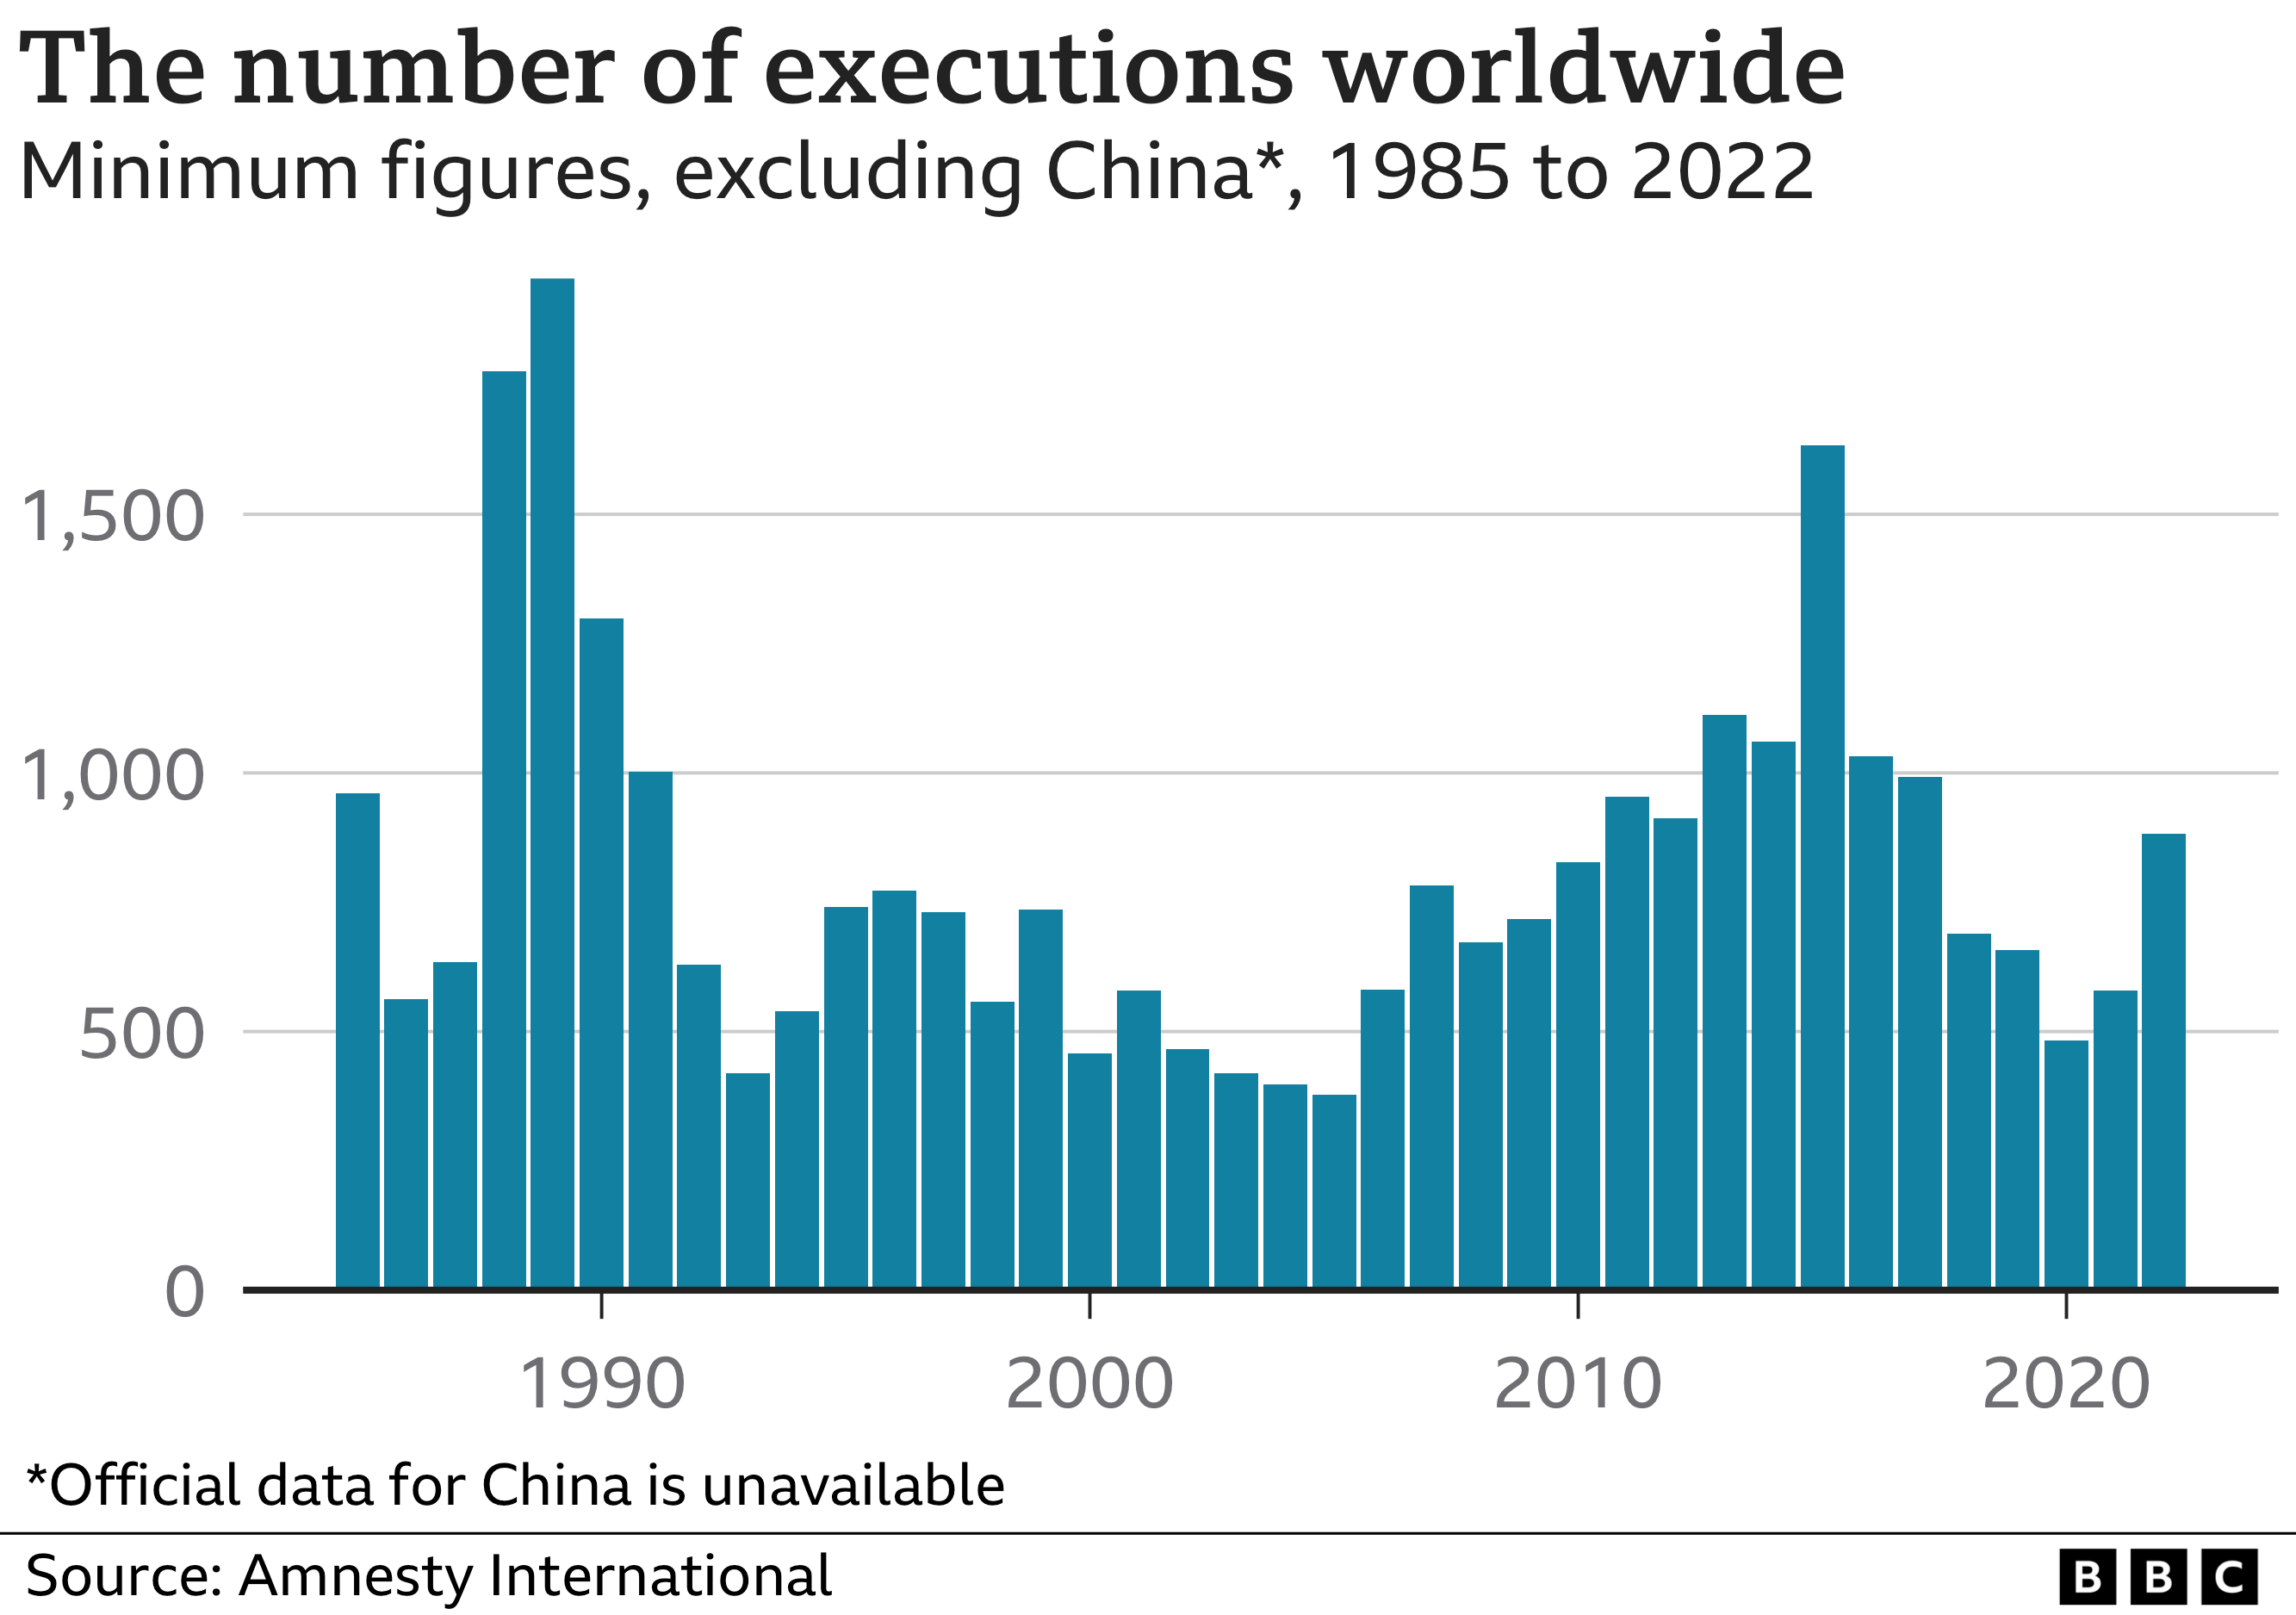 The number of executions worldwide between 1985 and 2022